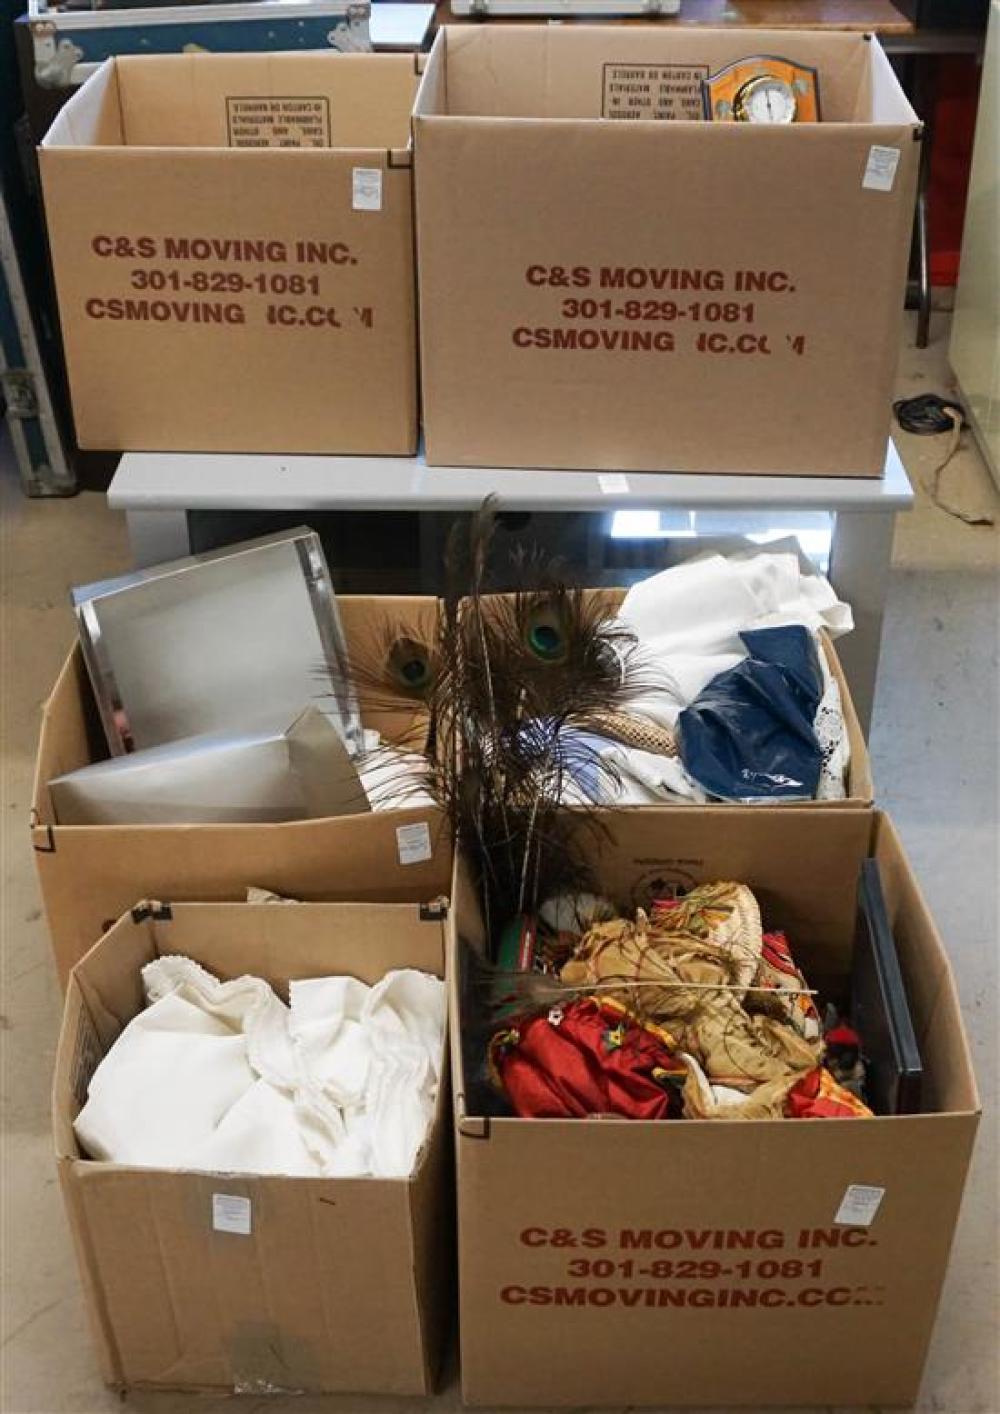 SIX BOXES OF LINENS, BOX OF CLOTH